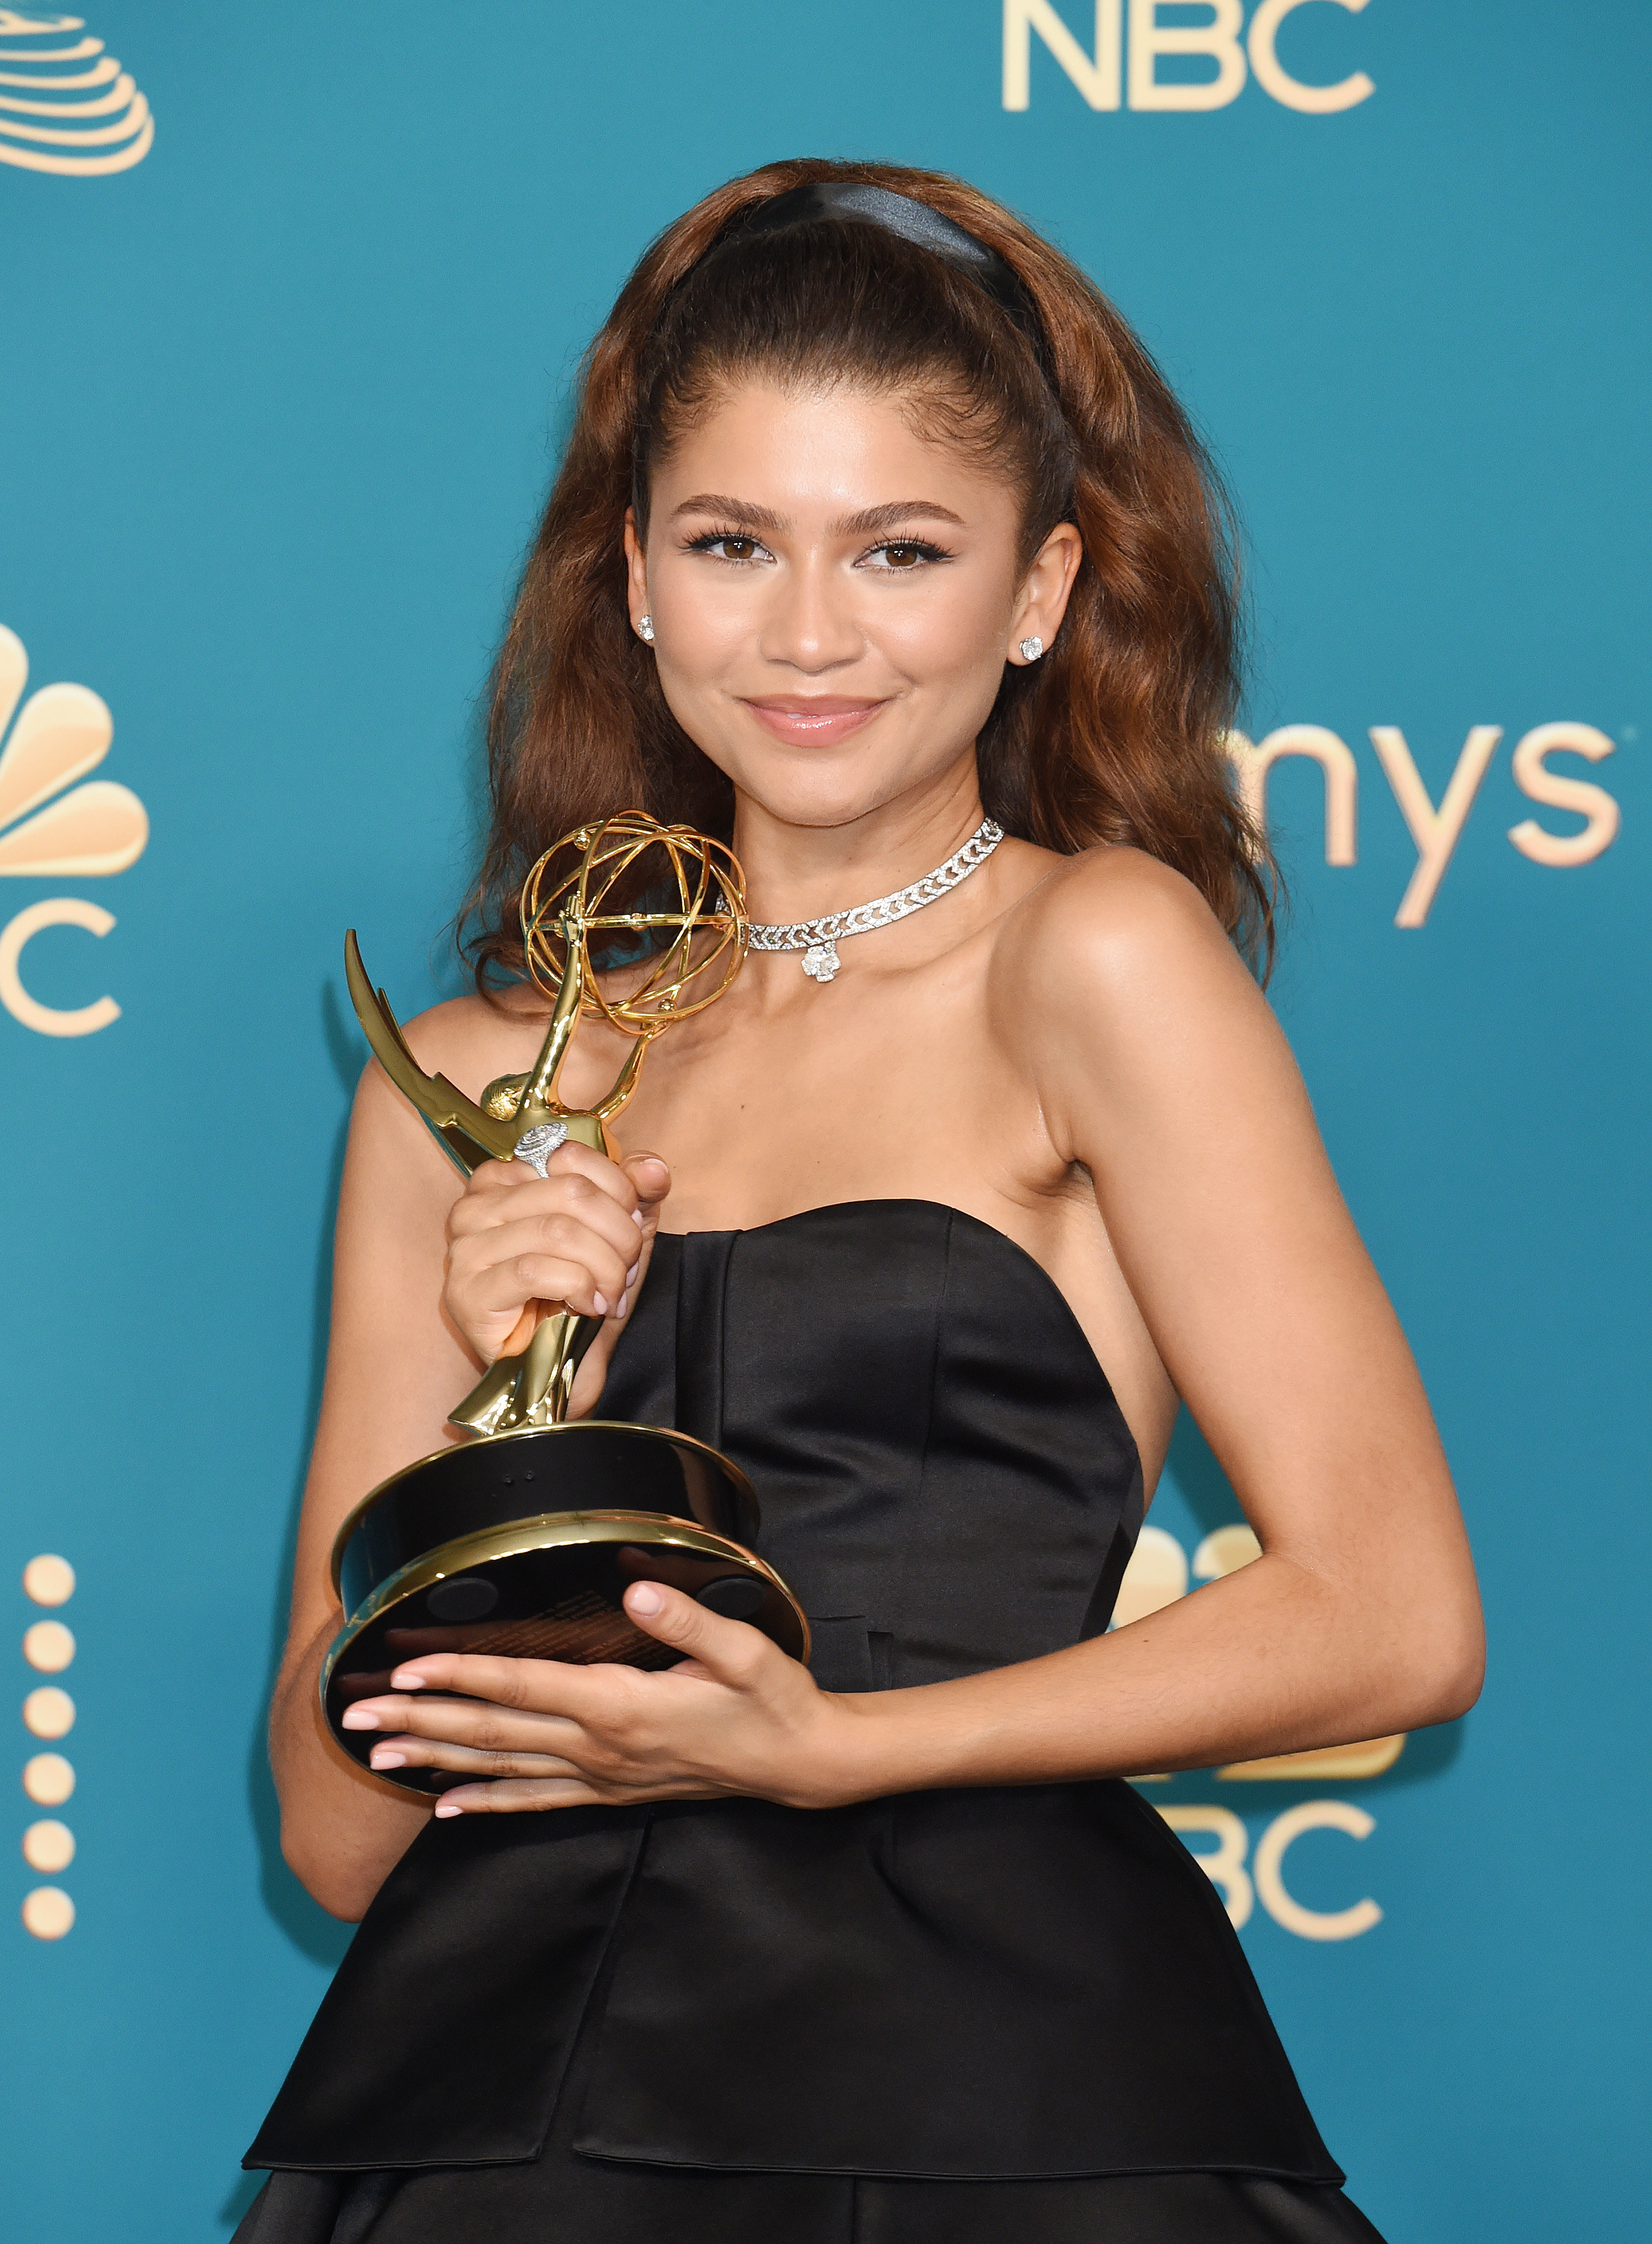 Zendaya wears a black dress fitted in the torso and flowing outwards from the rib cage. She holds an award and smiles, her medium brown hair pushed back from her face by a black ribbon. She wears a chunky silver jewellery,